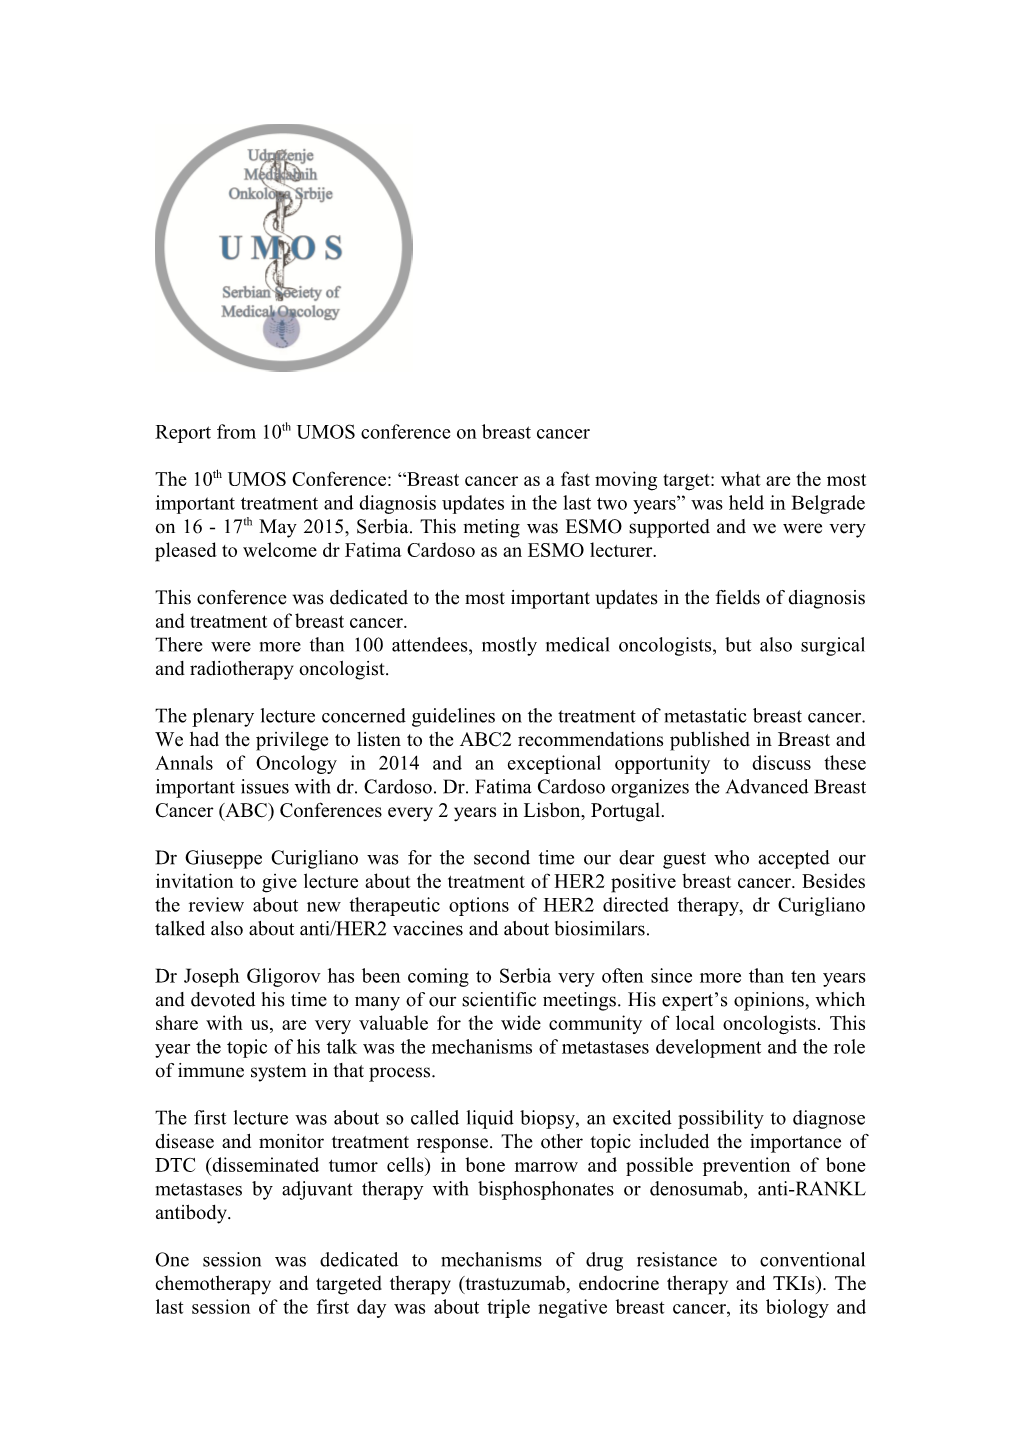 Report from 10Th UMOS Conference on Breast Cancer